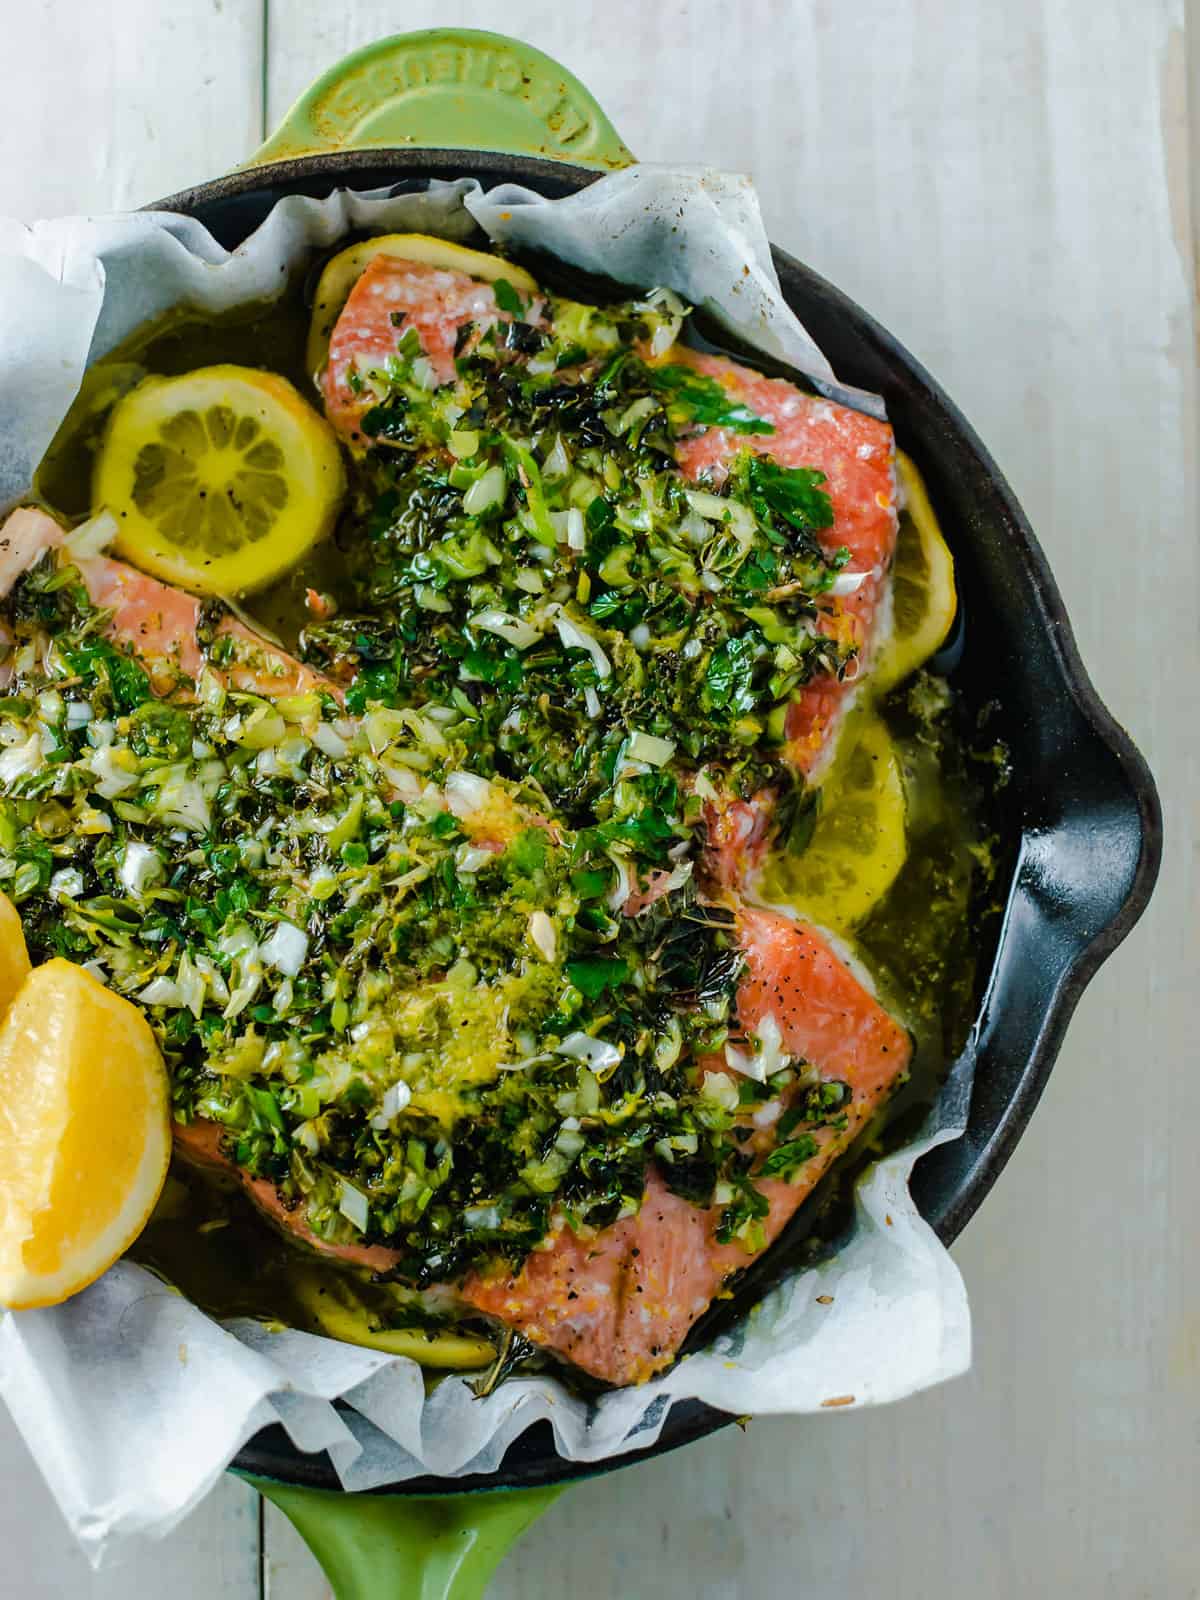 Lemon and herb crusted salmon with olive oil.